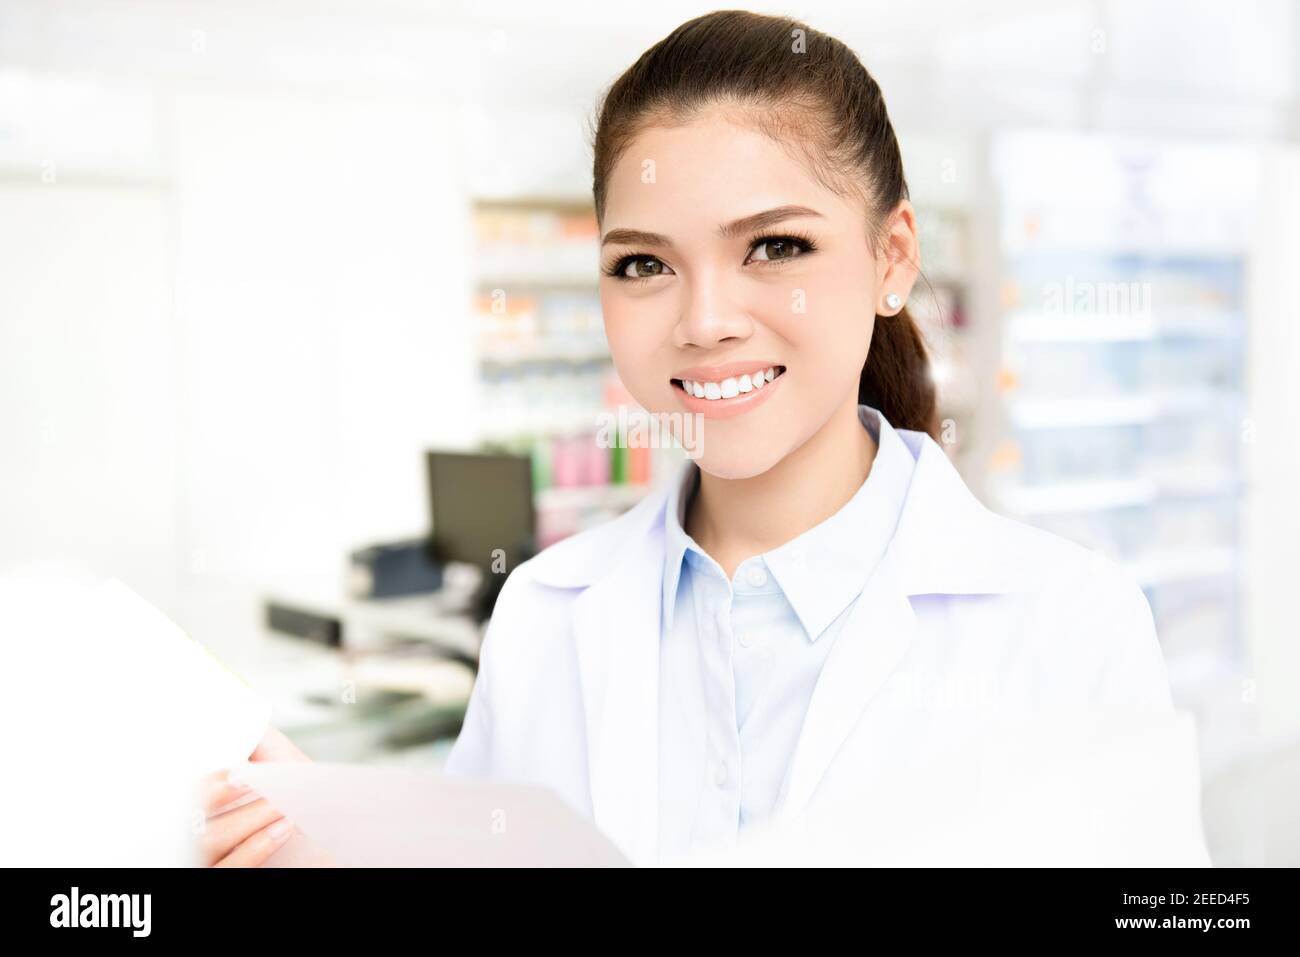 Smiling young Asian woman pharmacist in white gown coat looking at camera while working in pharmacy (chemist shop or drugstore) Stock Photo